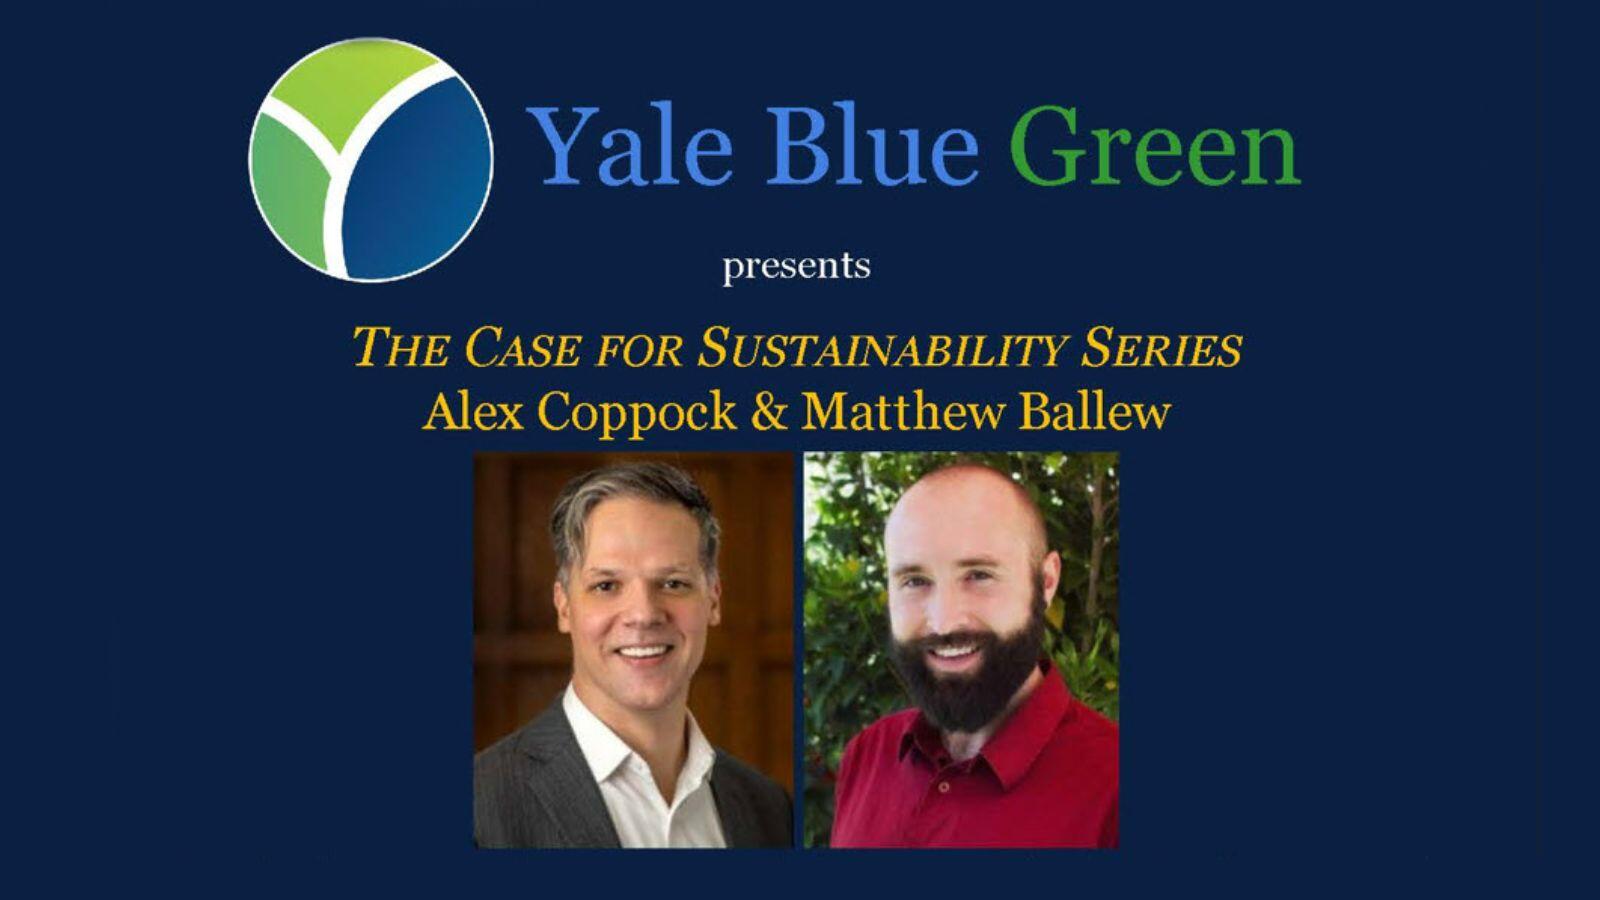 Yale Blue Green: The Case for Sustainability Series featuring Alex Coppock & Matthew Ballew